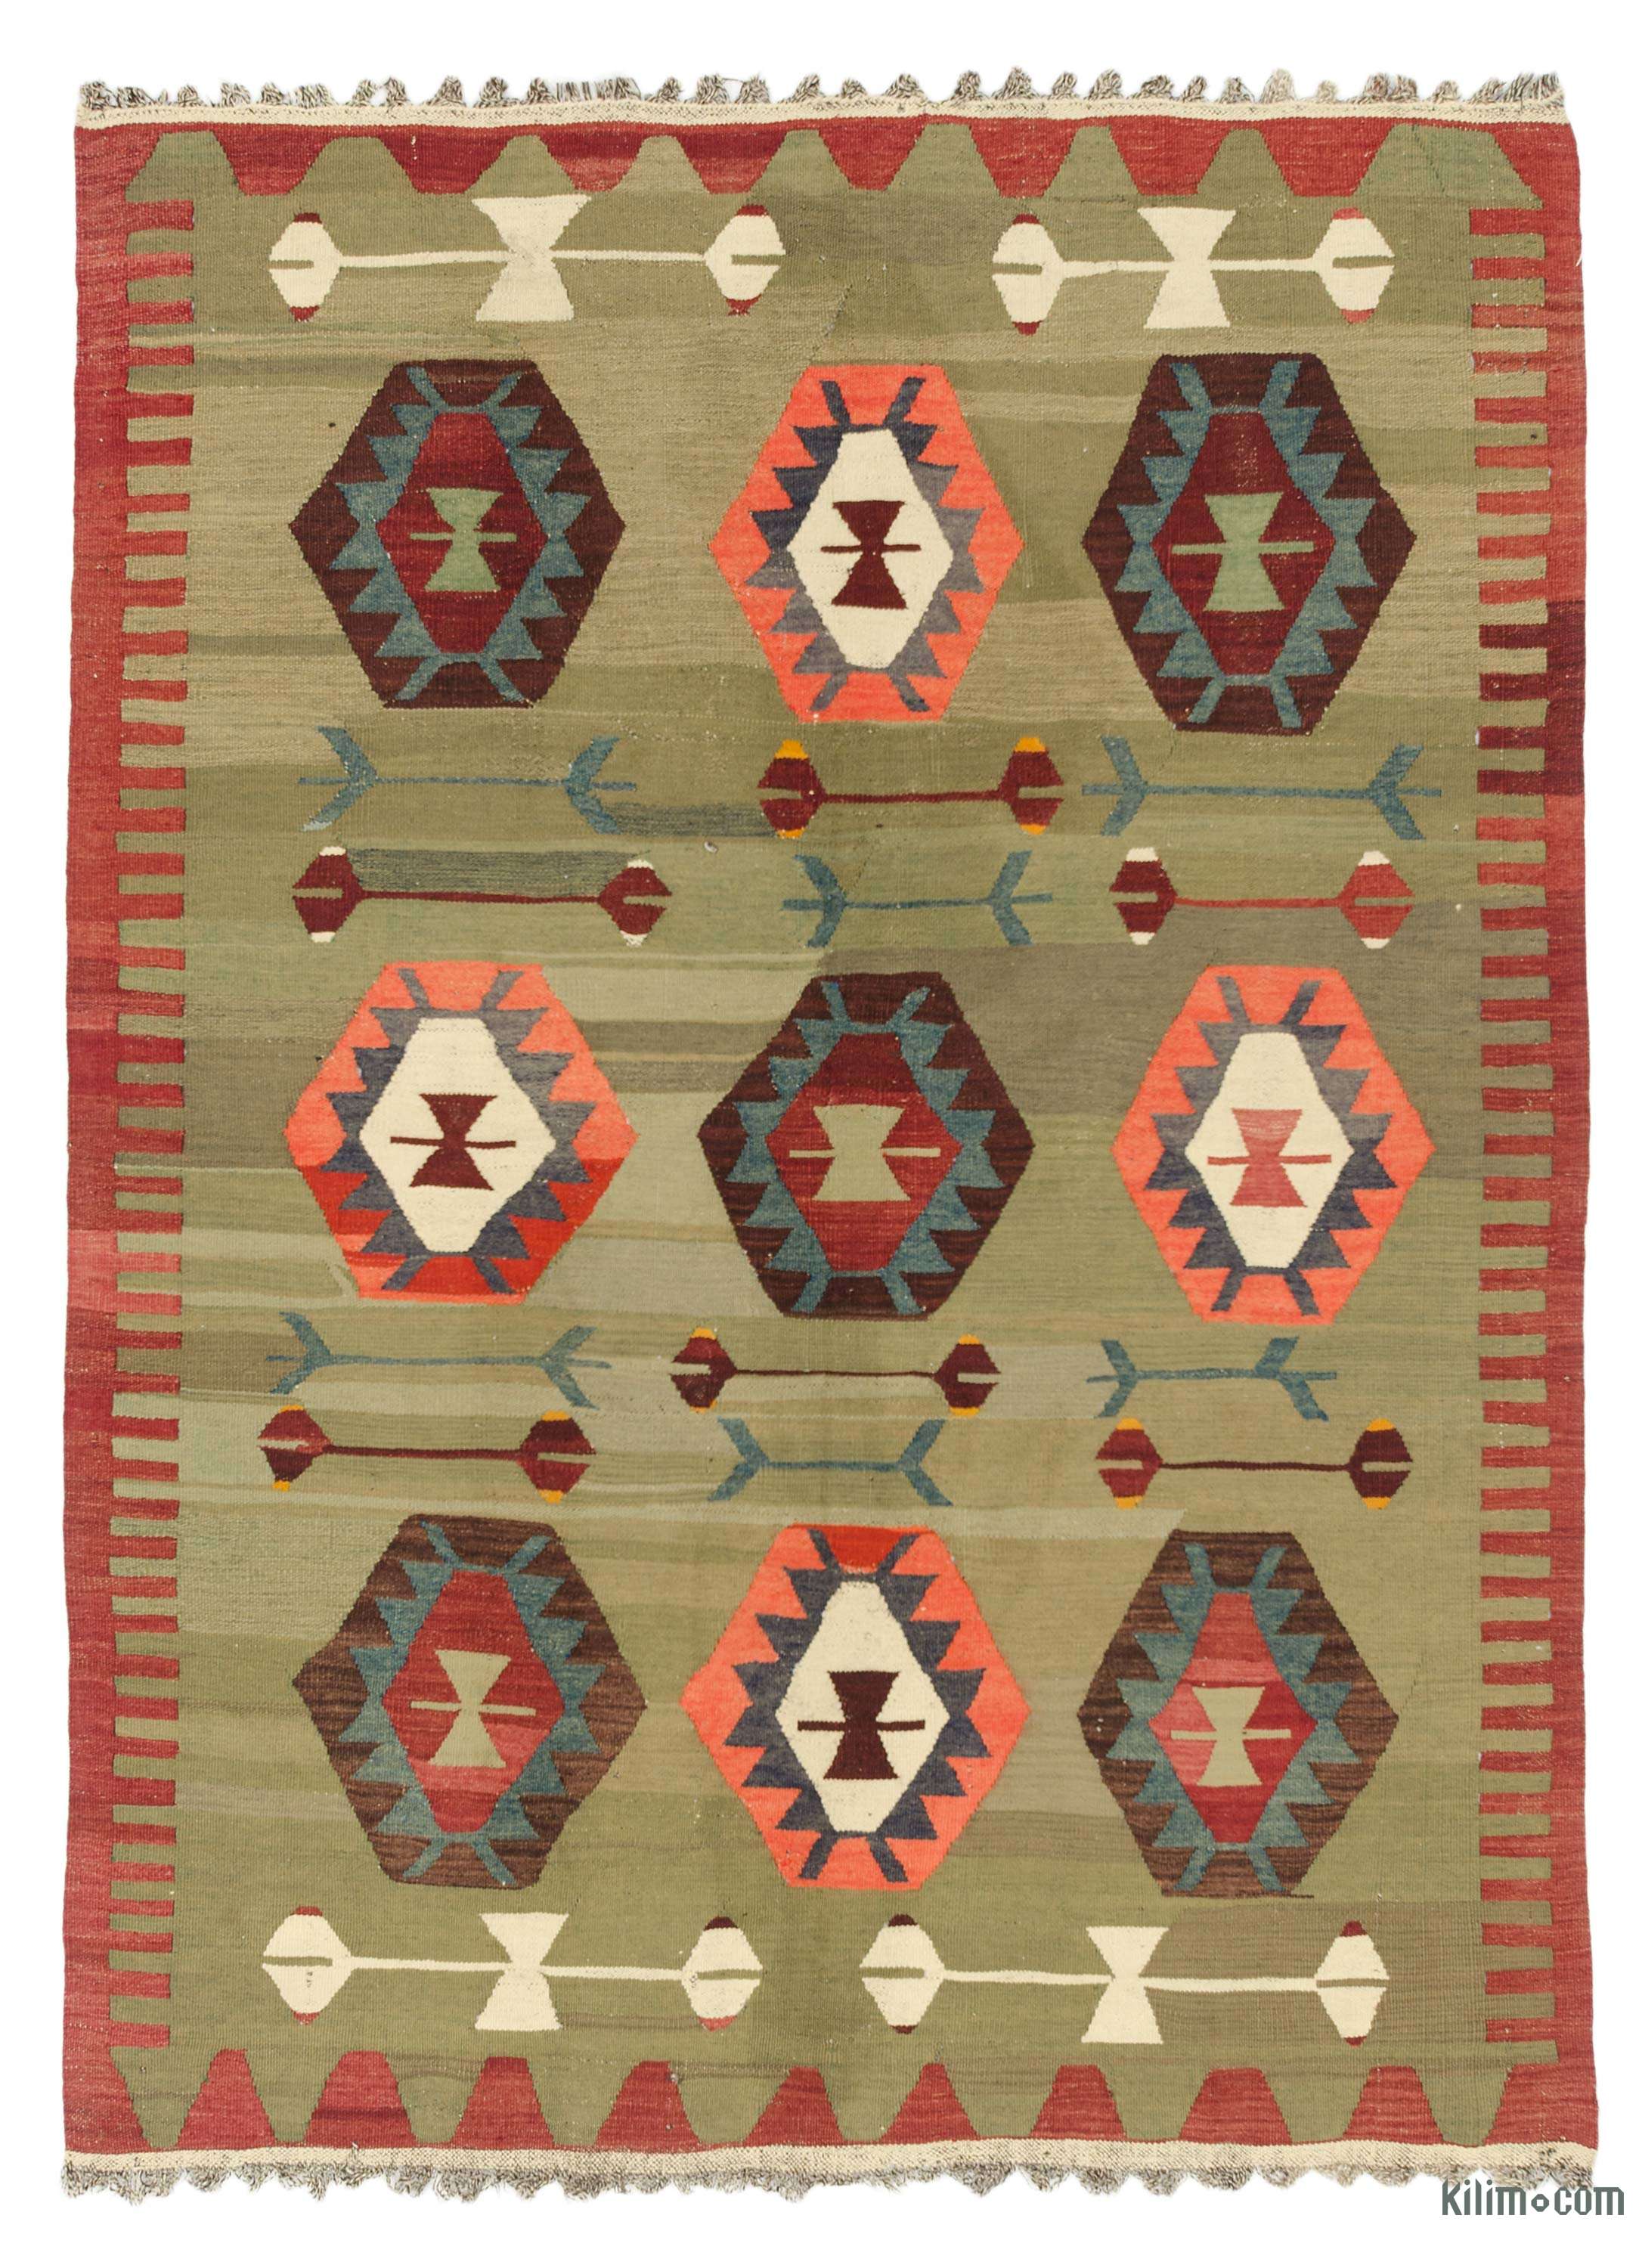 K0066987 Vintage Afyon Kilim Rug - 3' x 4' 8 (36 x 56)  The Source for  Vintage Rugs, Tribal Kilim Rugs, Wool Turkish Rugs, Overdyed Persian Rugs,  Runner Rugs, Patchwork Rugs